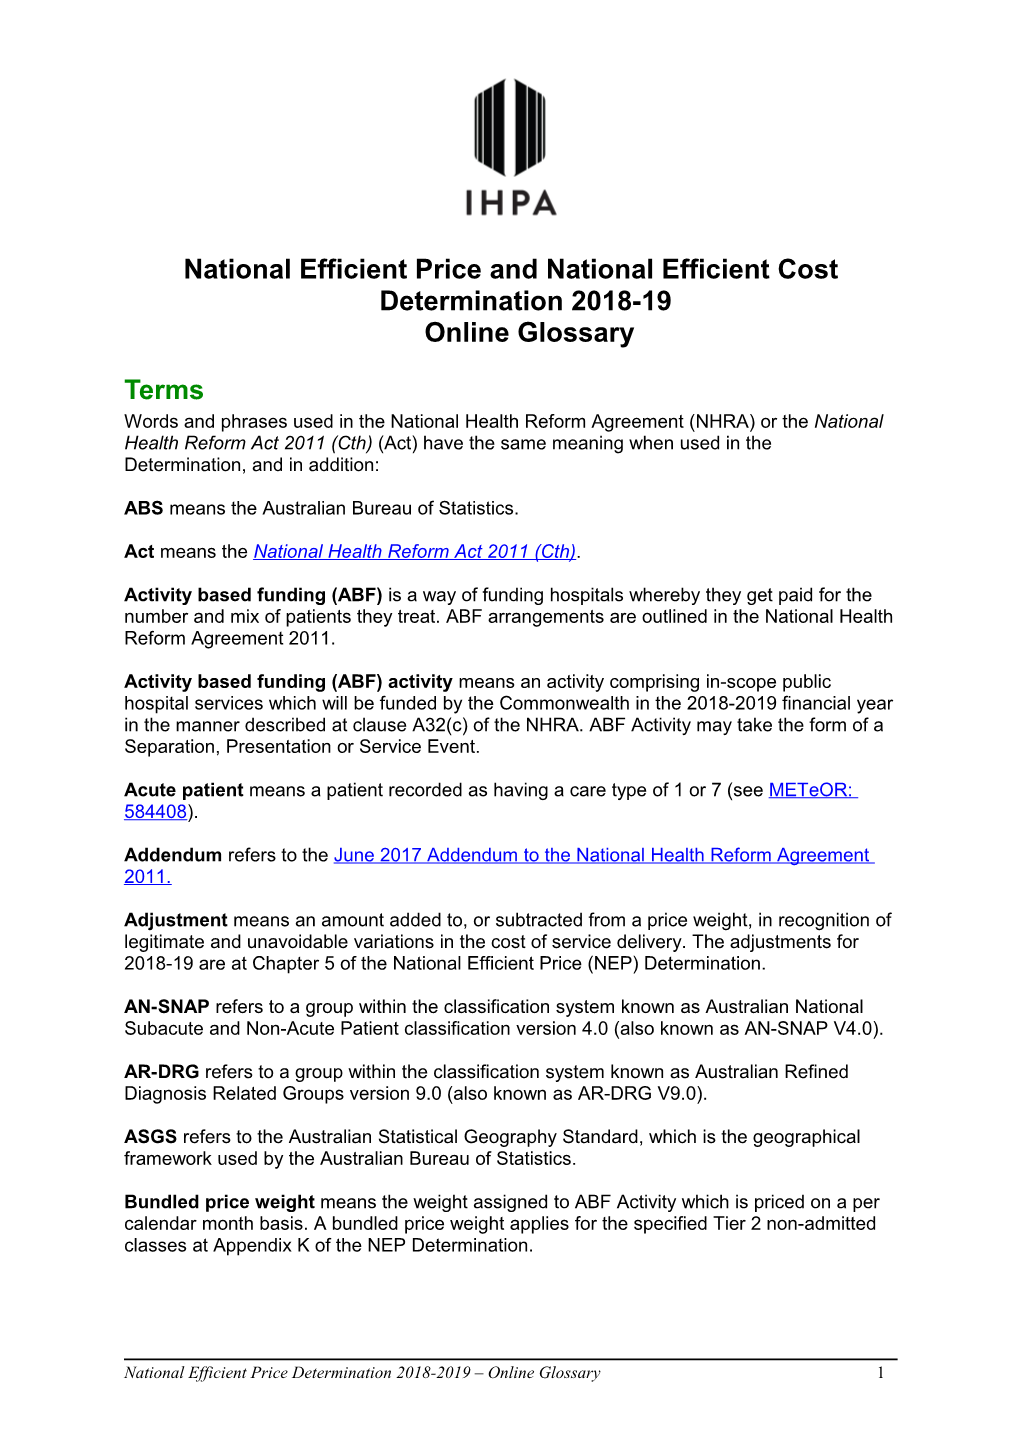 National Efficient Price and Cost Determination 2016-17